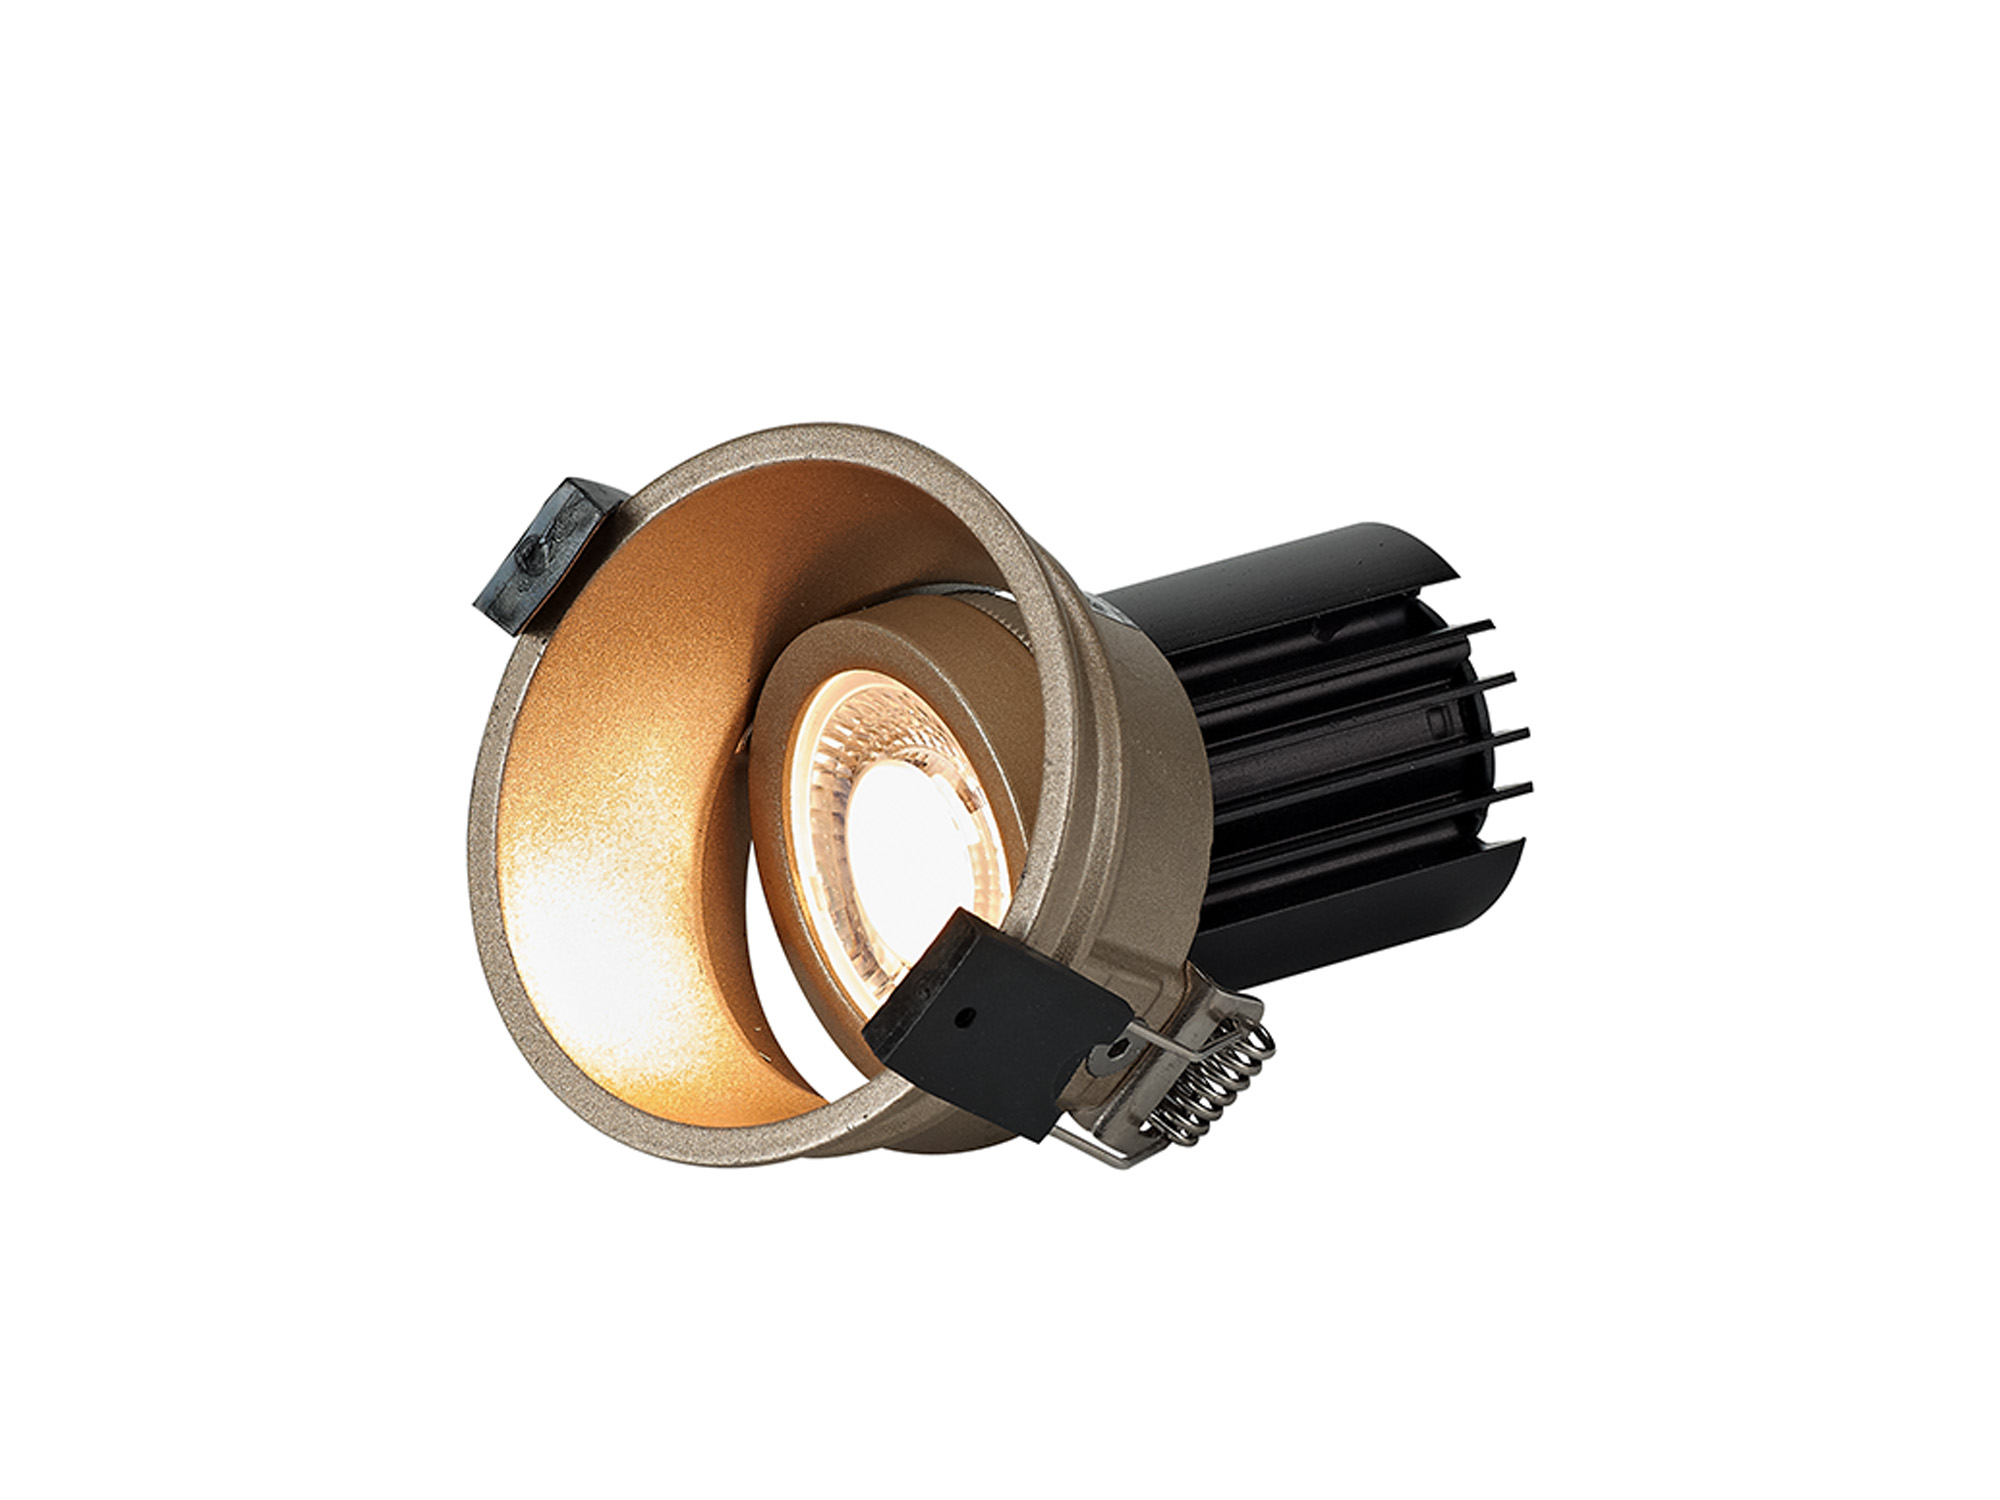 DM201747  Bania A 12 Powered by Tridonic  12W 2700K 1200lm 12° CRI>90 LED Engine, 350mA Gold Adjustable Recessed Spotlight, IP20